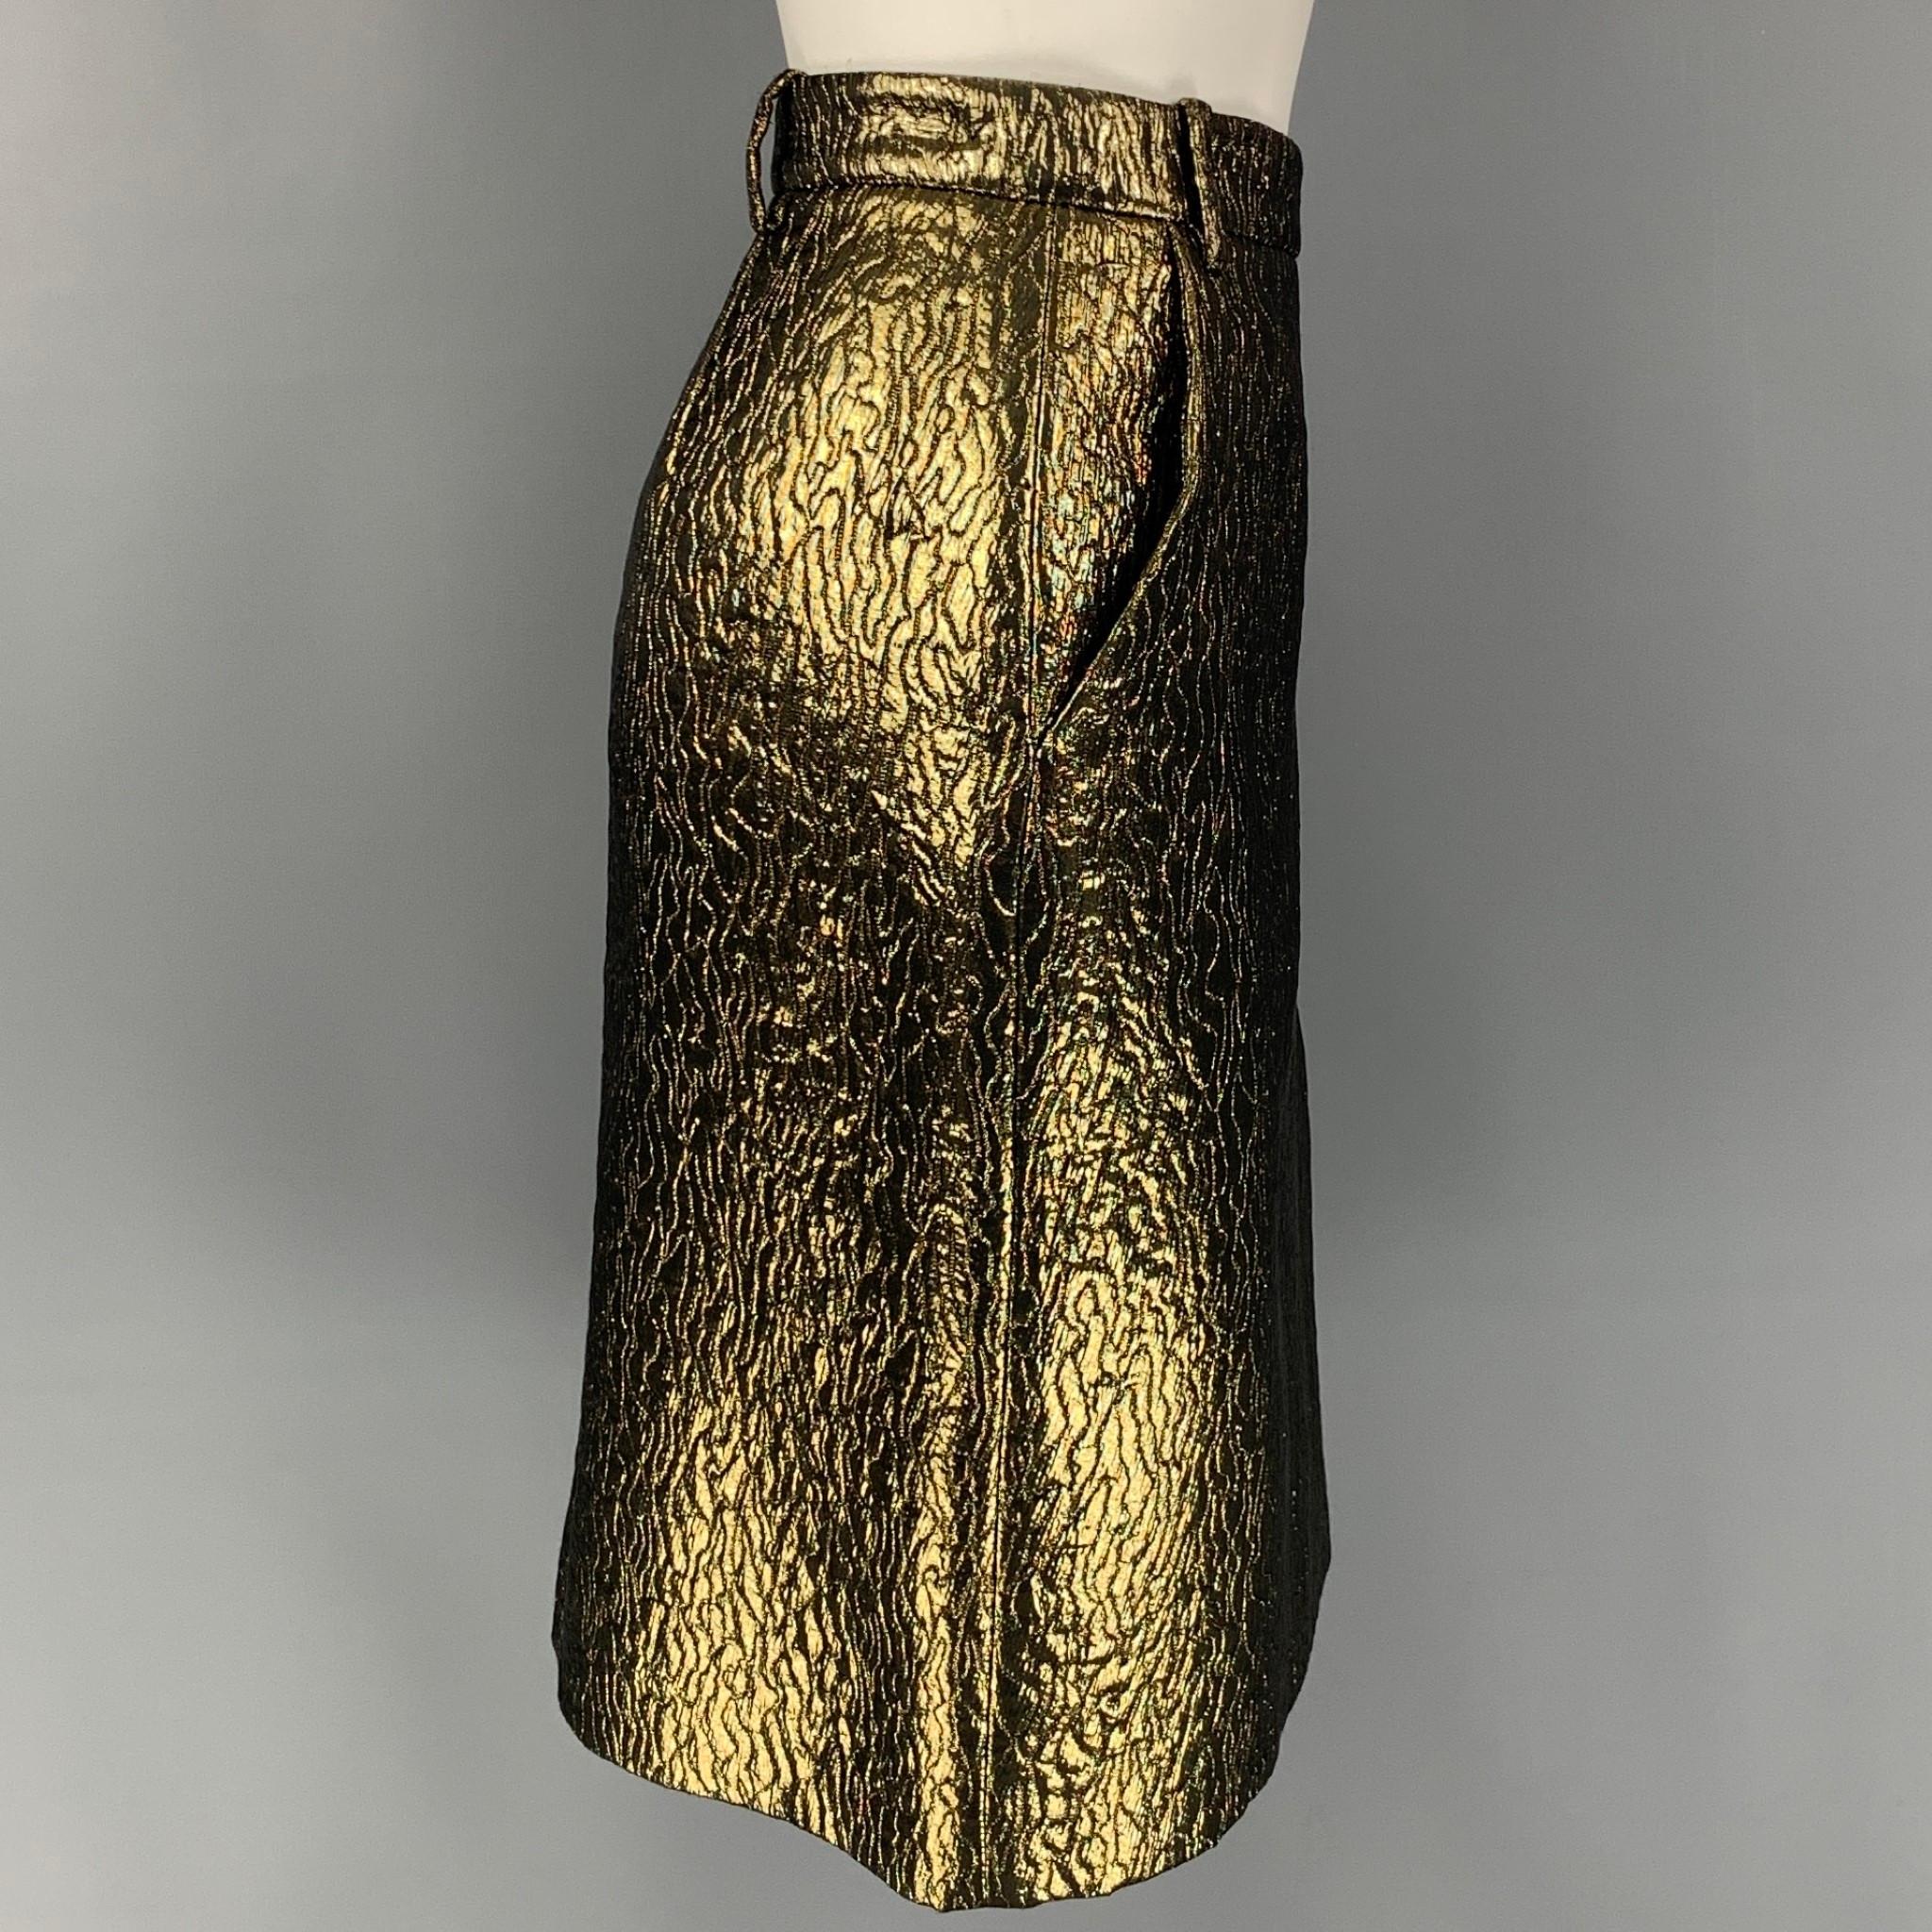 SALVATORE FERRAGAMO skirt comes in a gold & black textured polyester blend featuring a wrap style, belt loops, slit pockets, and a back zipper closure. Made in Italy. 

Excellent Pre-Owned Condition.
Marked: 42

Measurements:

Waist: 30 in.
Hip: 38